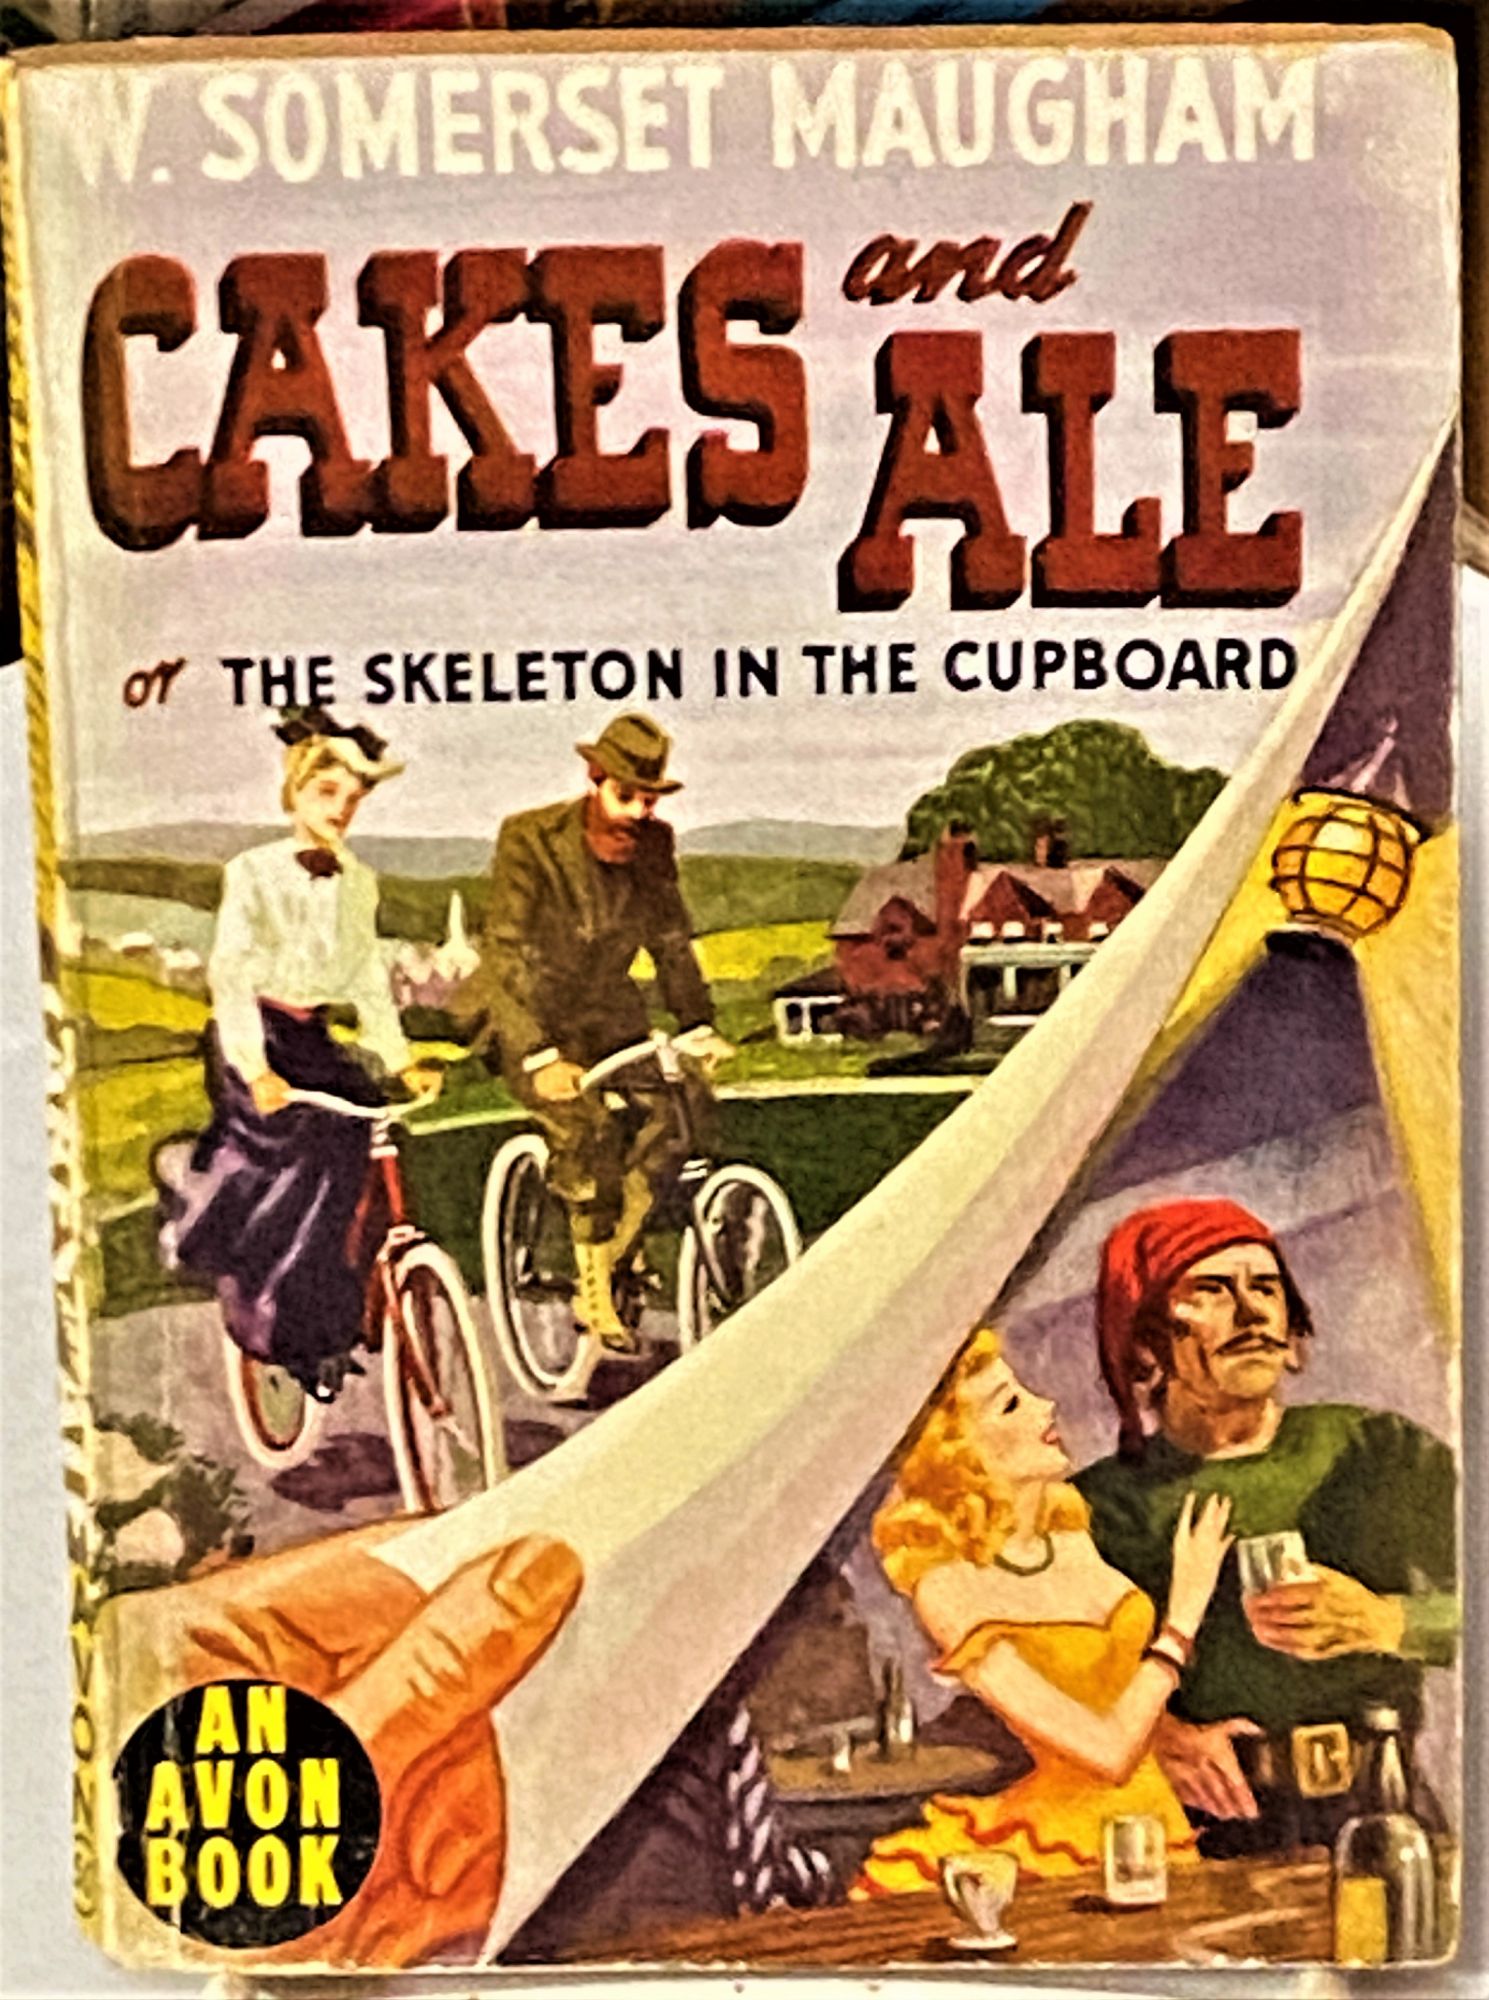 Cakes and Ale Holiday Park in Theberton, Suffolk